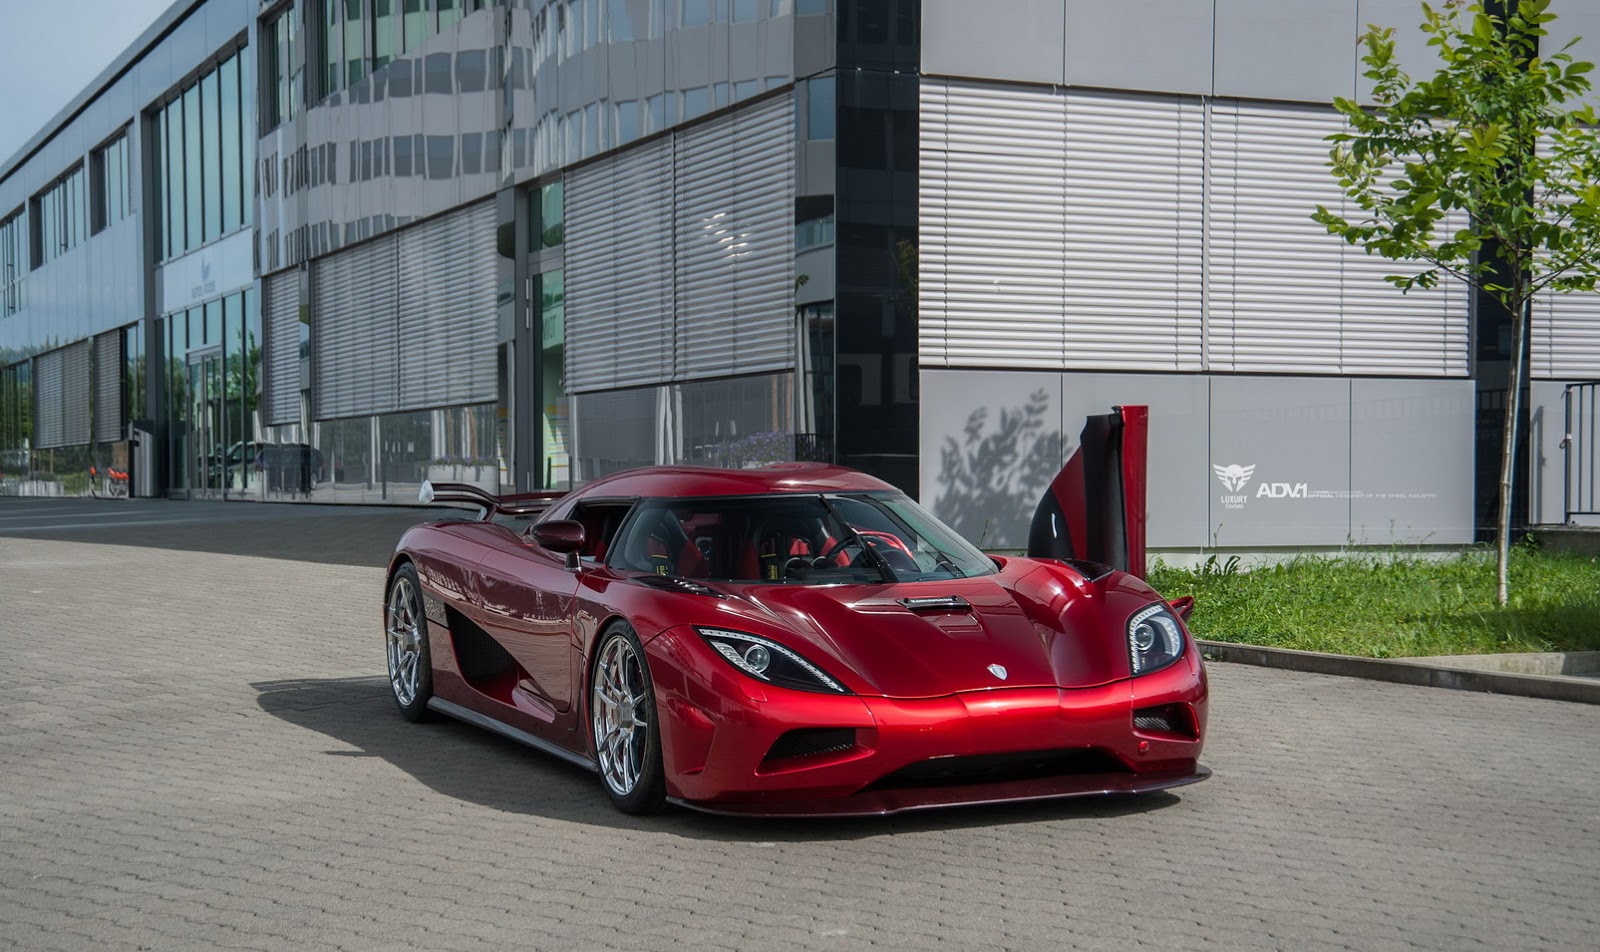 Koenisegg Agera R Cars Wallpapers